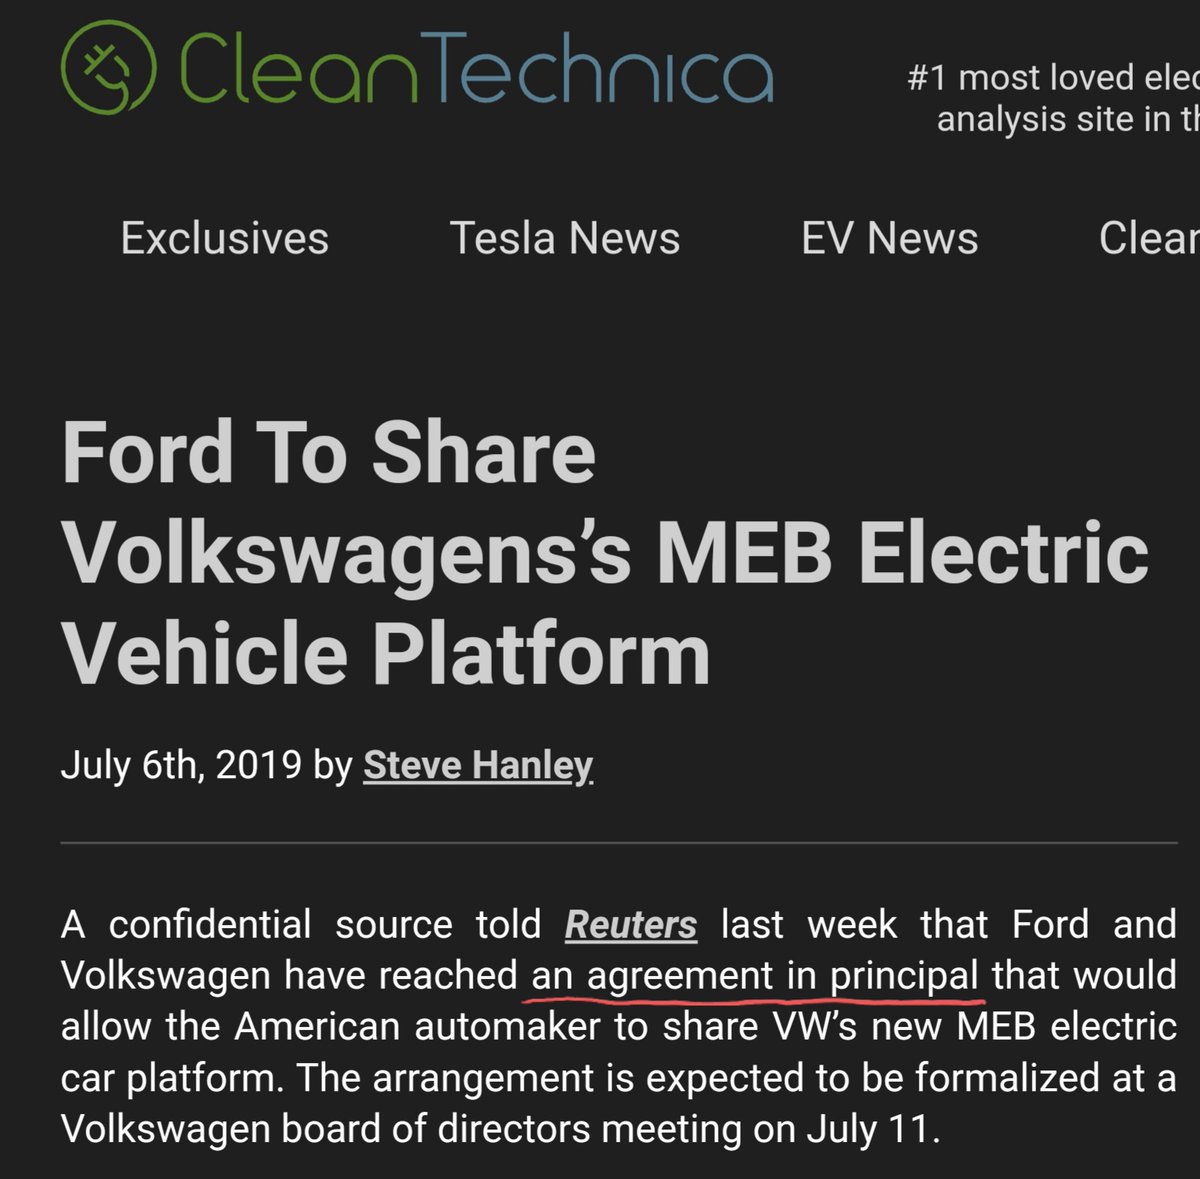 VW has always said they wanted to share their platform, and while it was looking like Ford was going to close the deal I can't  find any articles confirming after this date... So this still could be possible for Fisker.